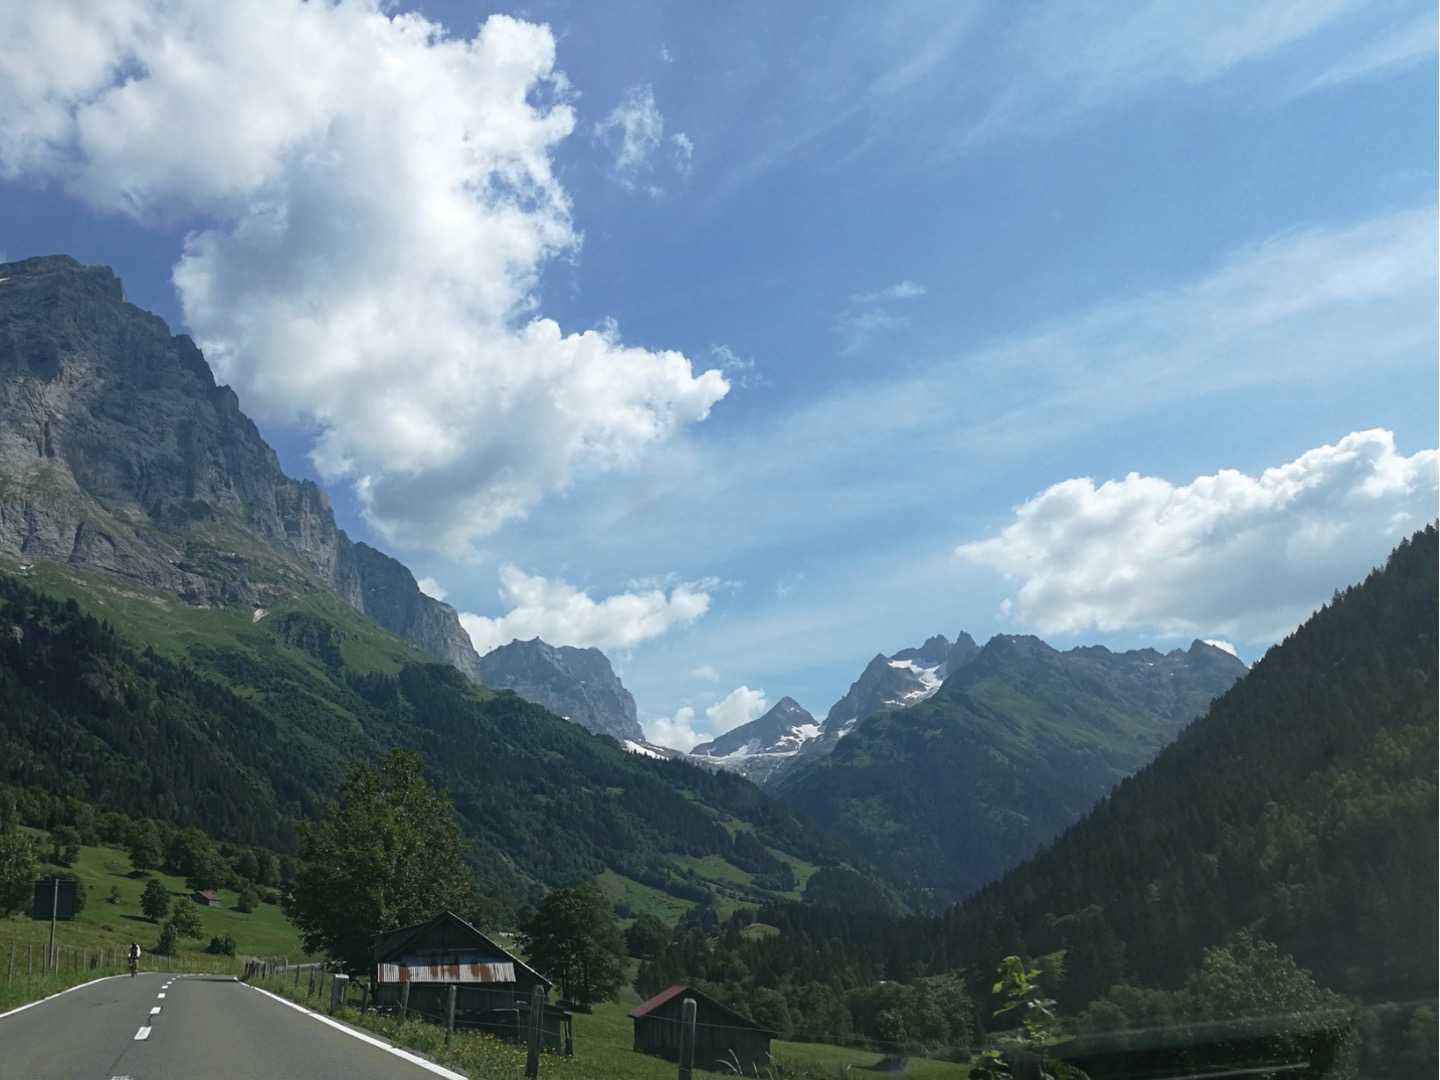 Driving through the Alps